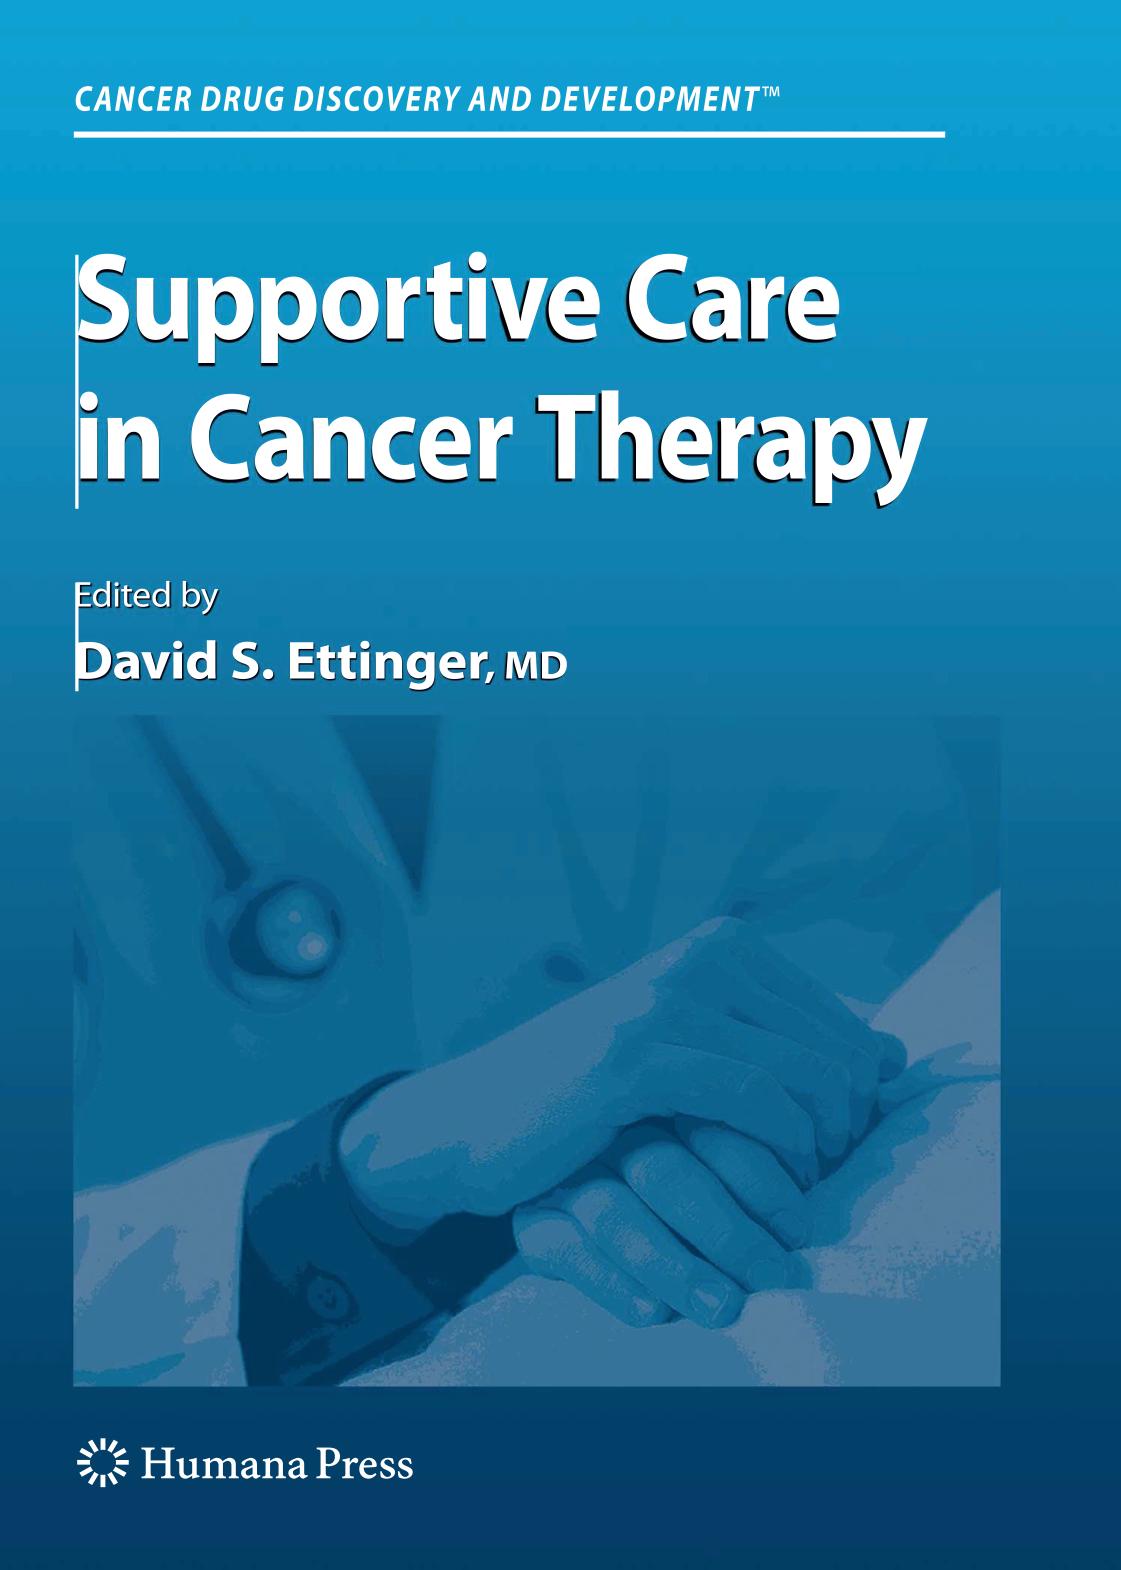 Supportive care in cancer therapy